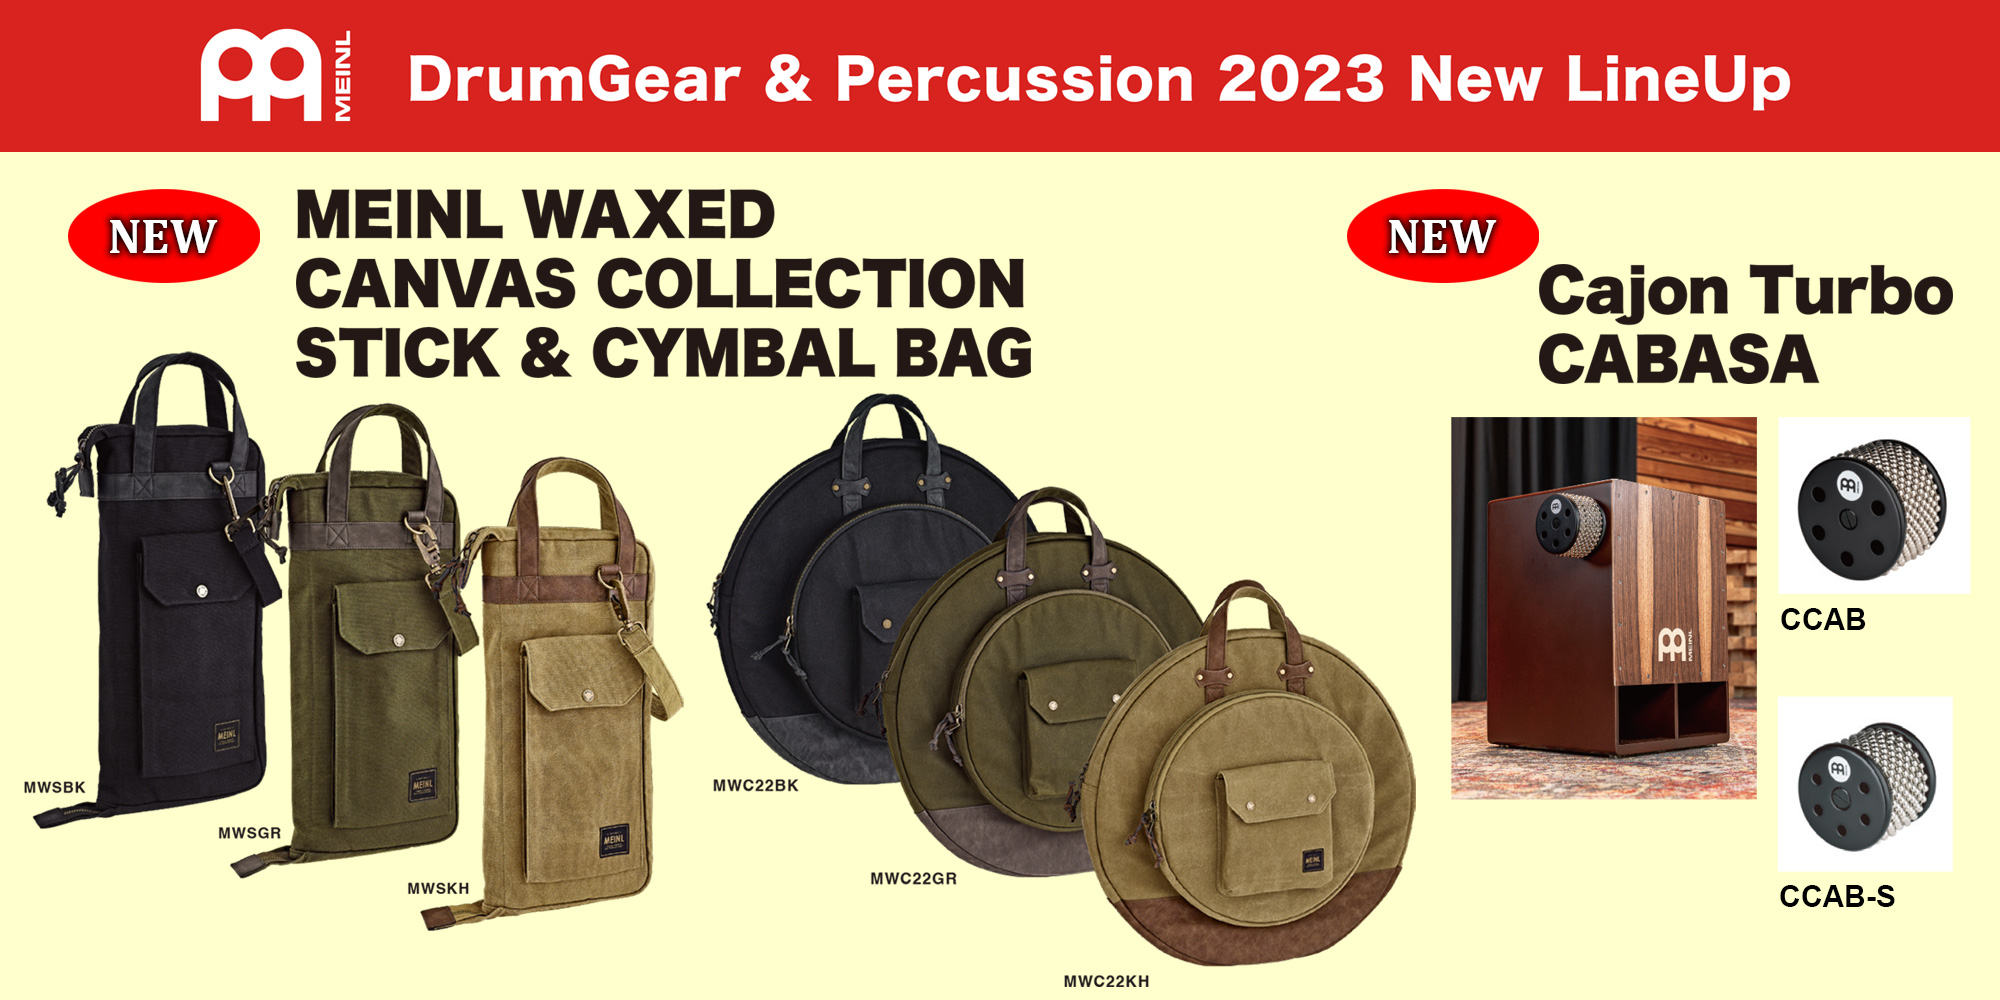 meinl_percussion_2023_new_banner01